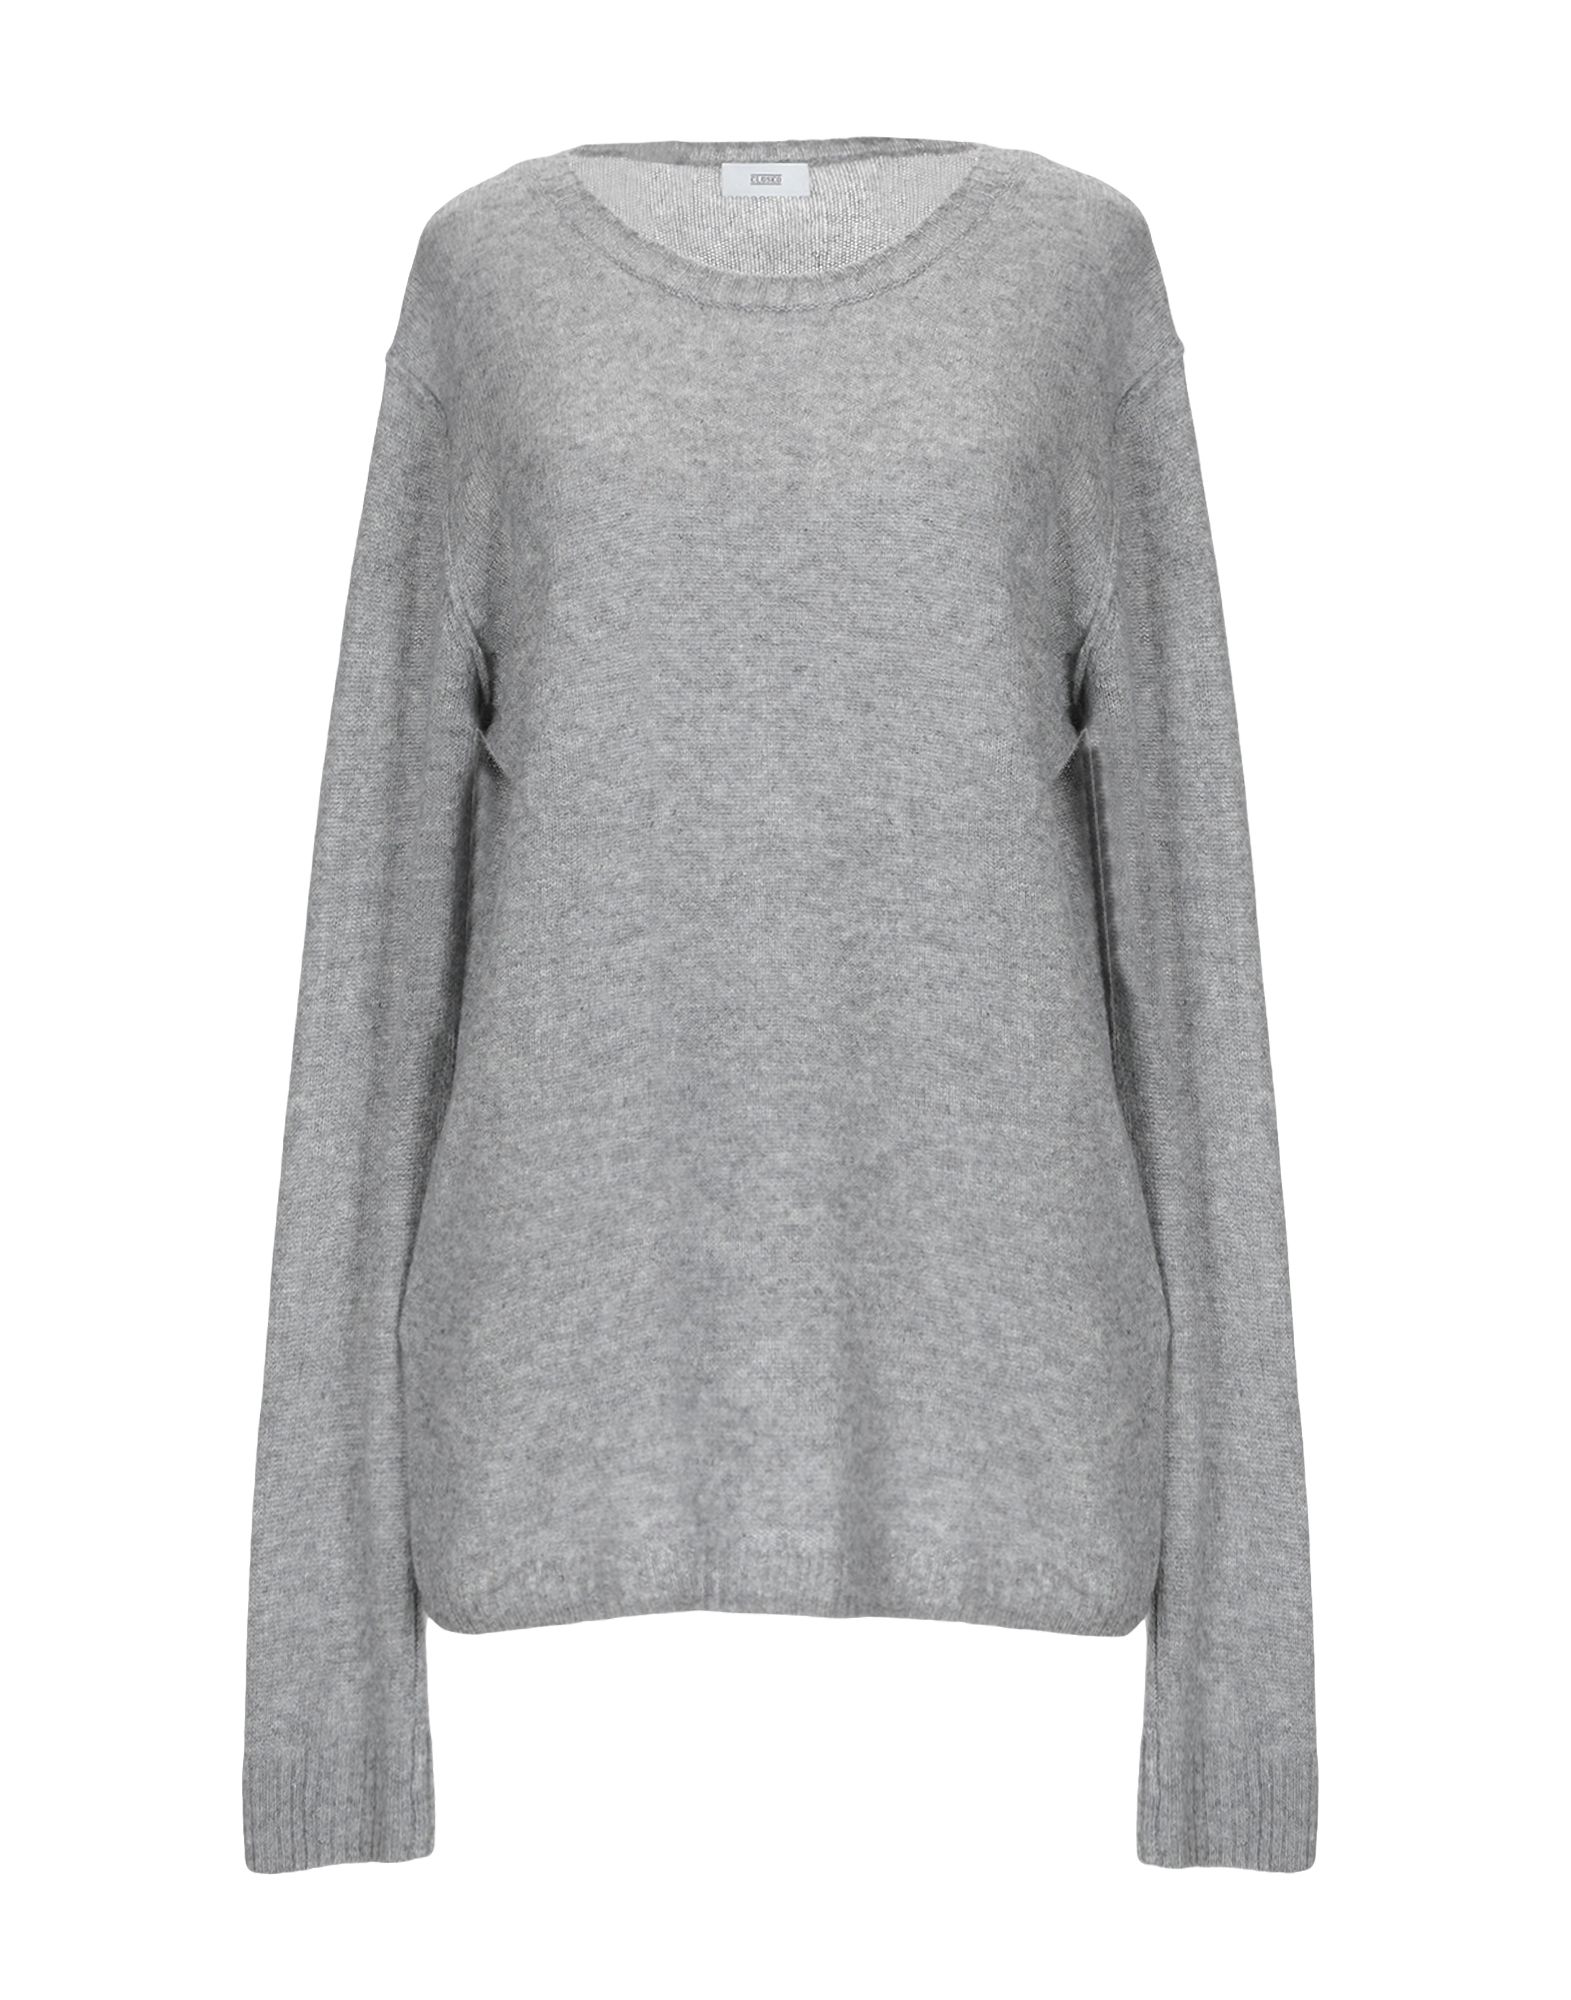 Closed Cashmere Blend In Grey | ModeSens